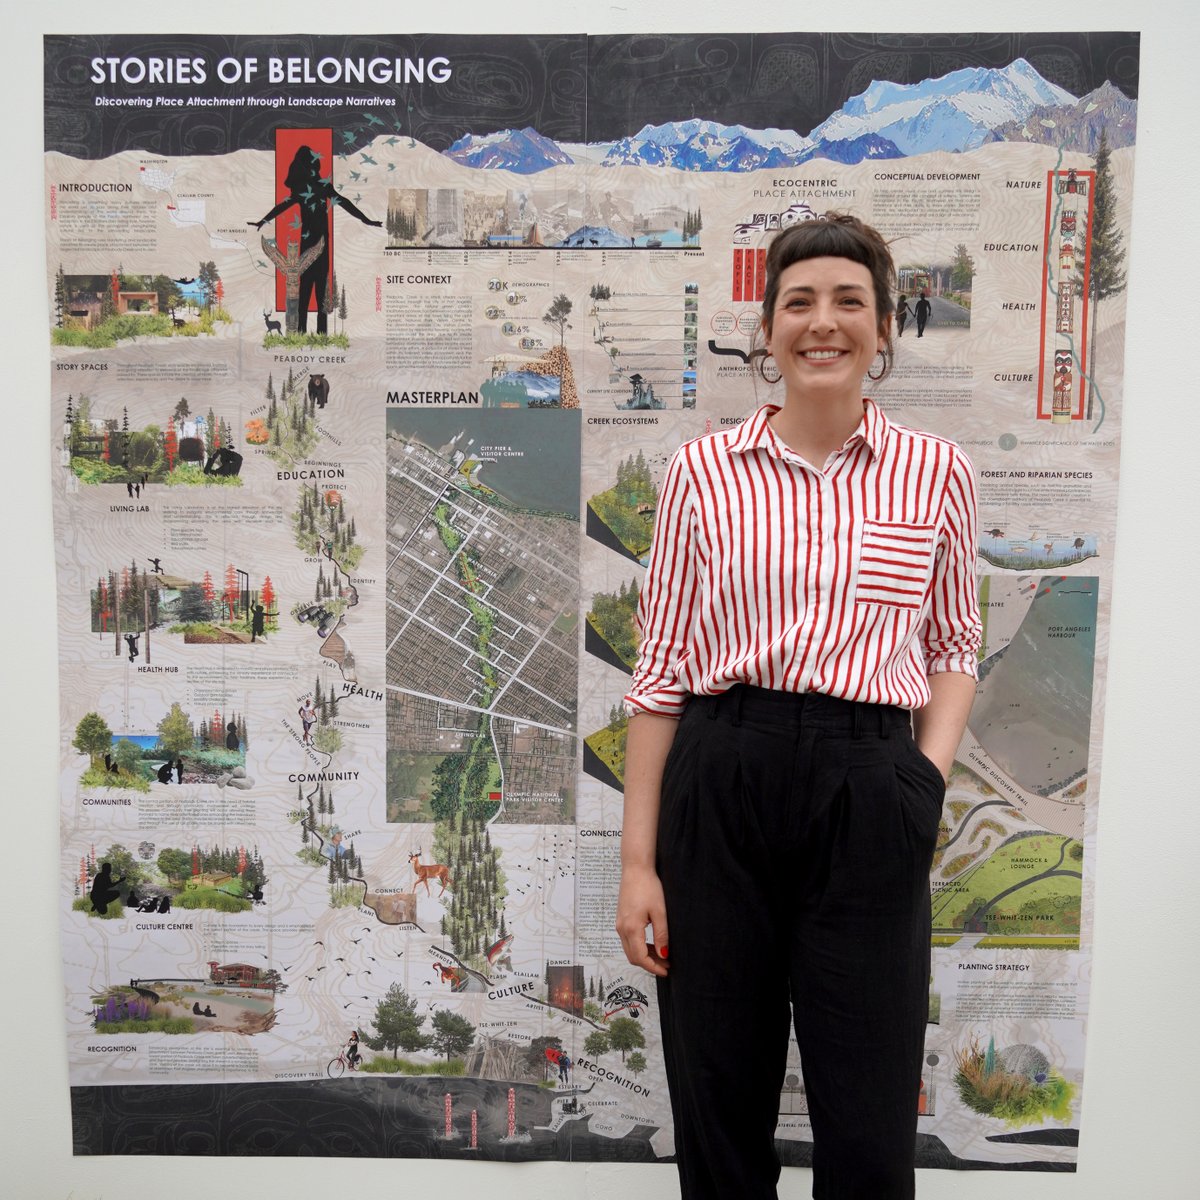 It’s time to announce the #winner of the #WUCshow2023 Essex Gardens Trust People's Choice Award.

The winner is... Lissy Moriarty (MA Landscape Architecture), with her project entitled ‘Stories of Belonging'.

#WrittleDesign #LandscapeArchitecture #Design #DegreeShow #Exhibition